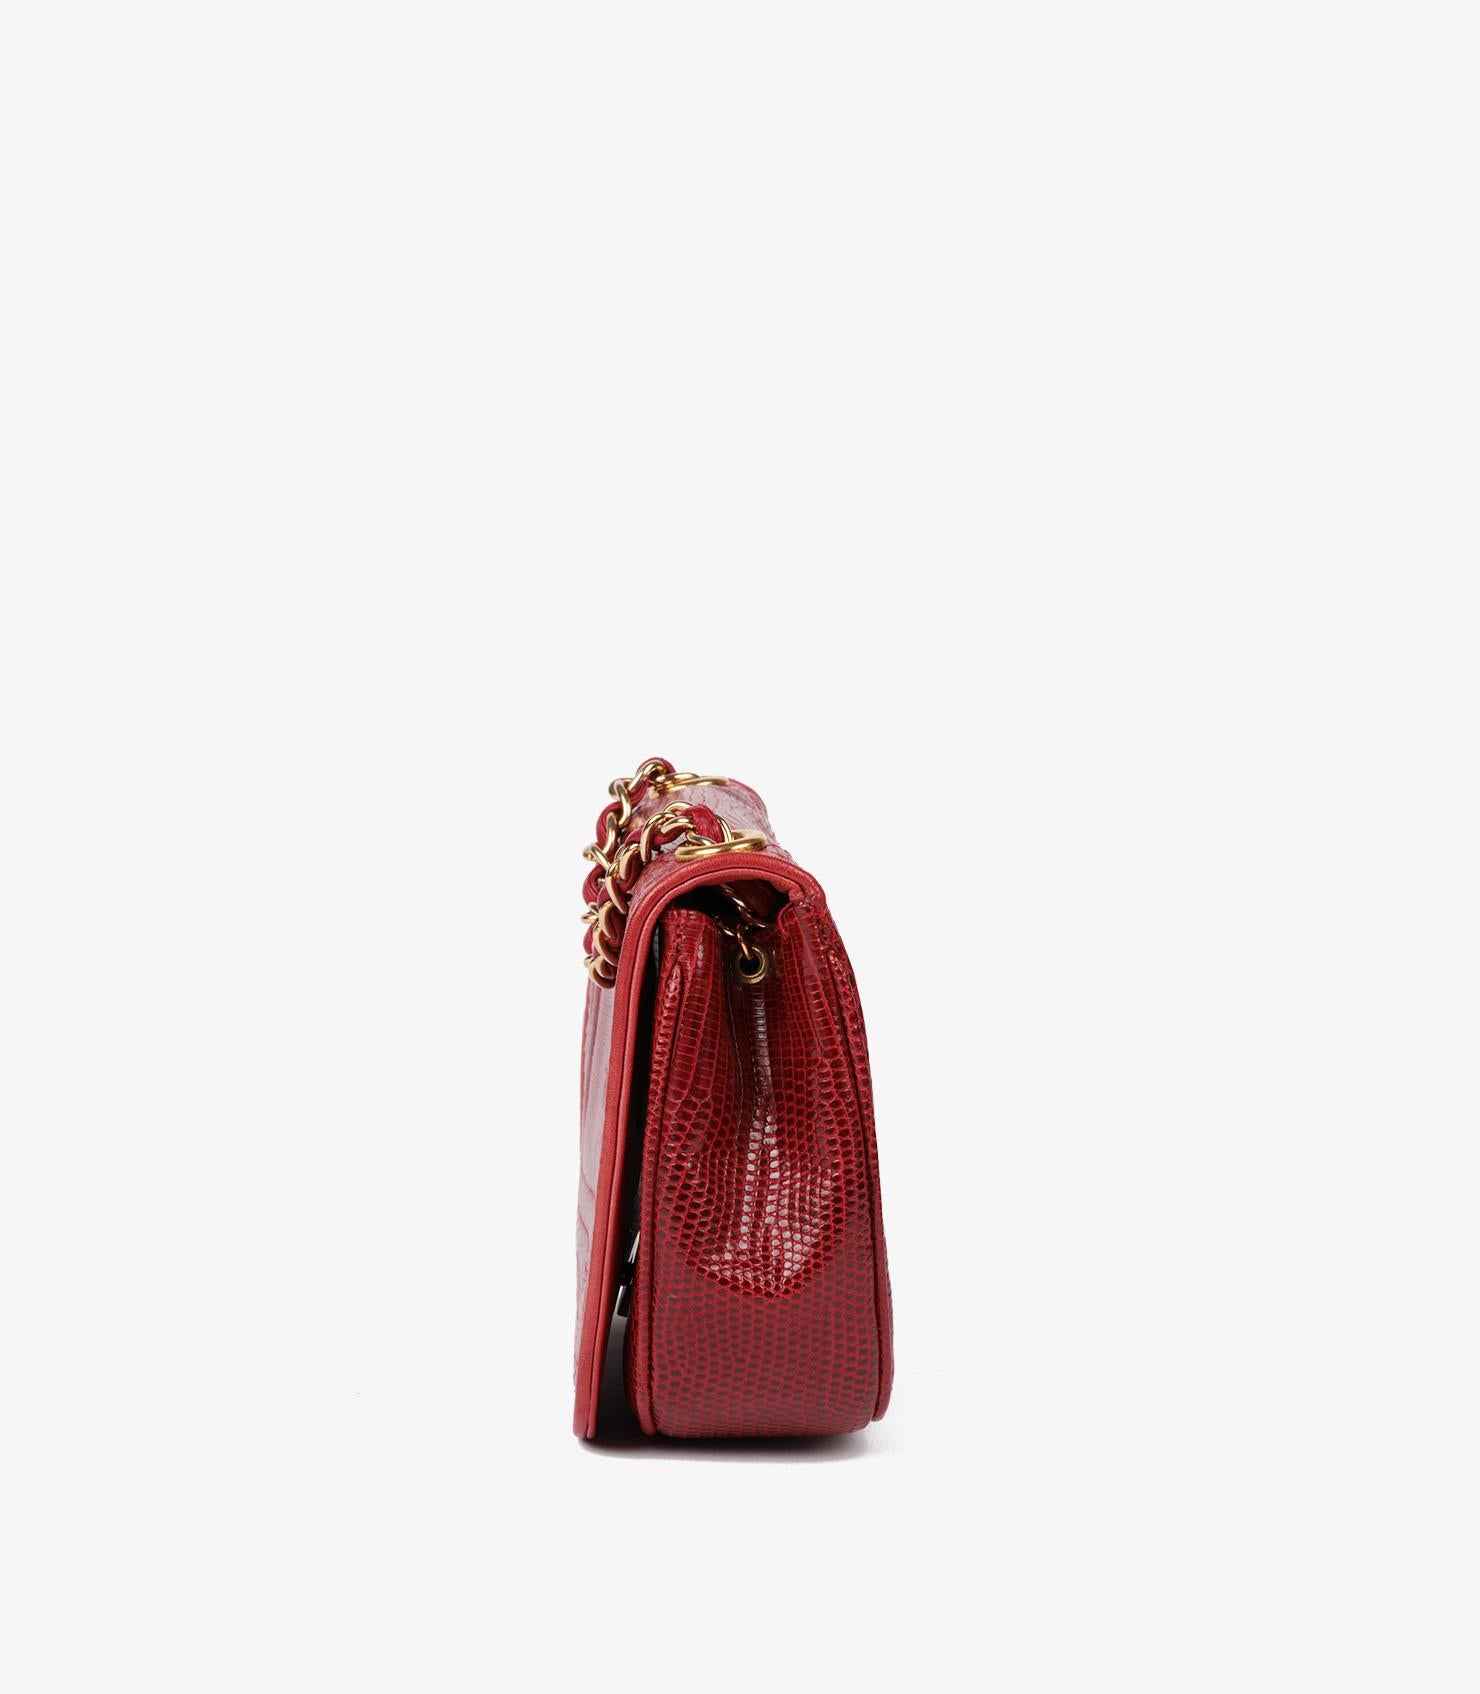 Women's or Men's Chanel Red Lizard Leather Vintage Timeless Mini Flap Bag For Sale